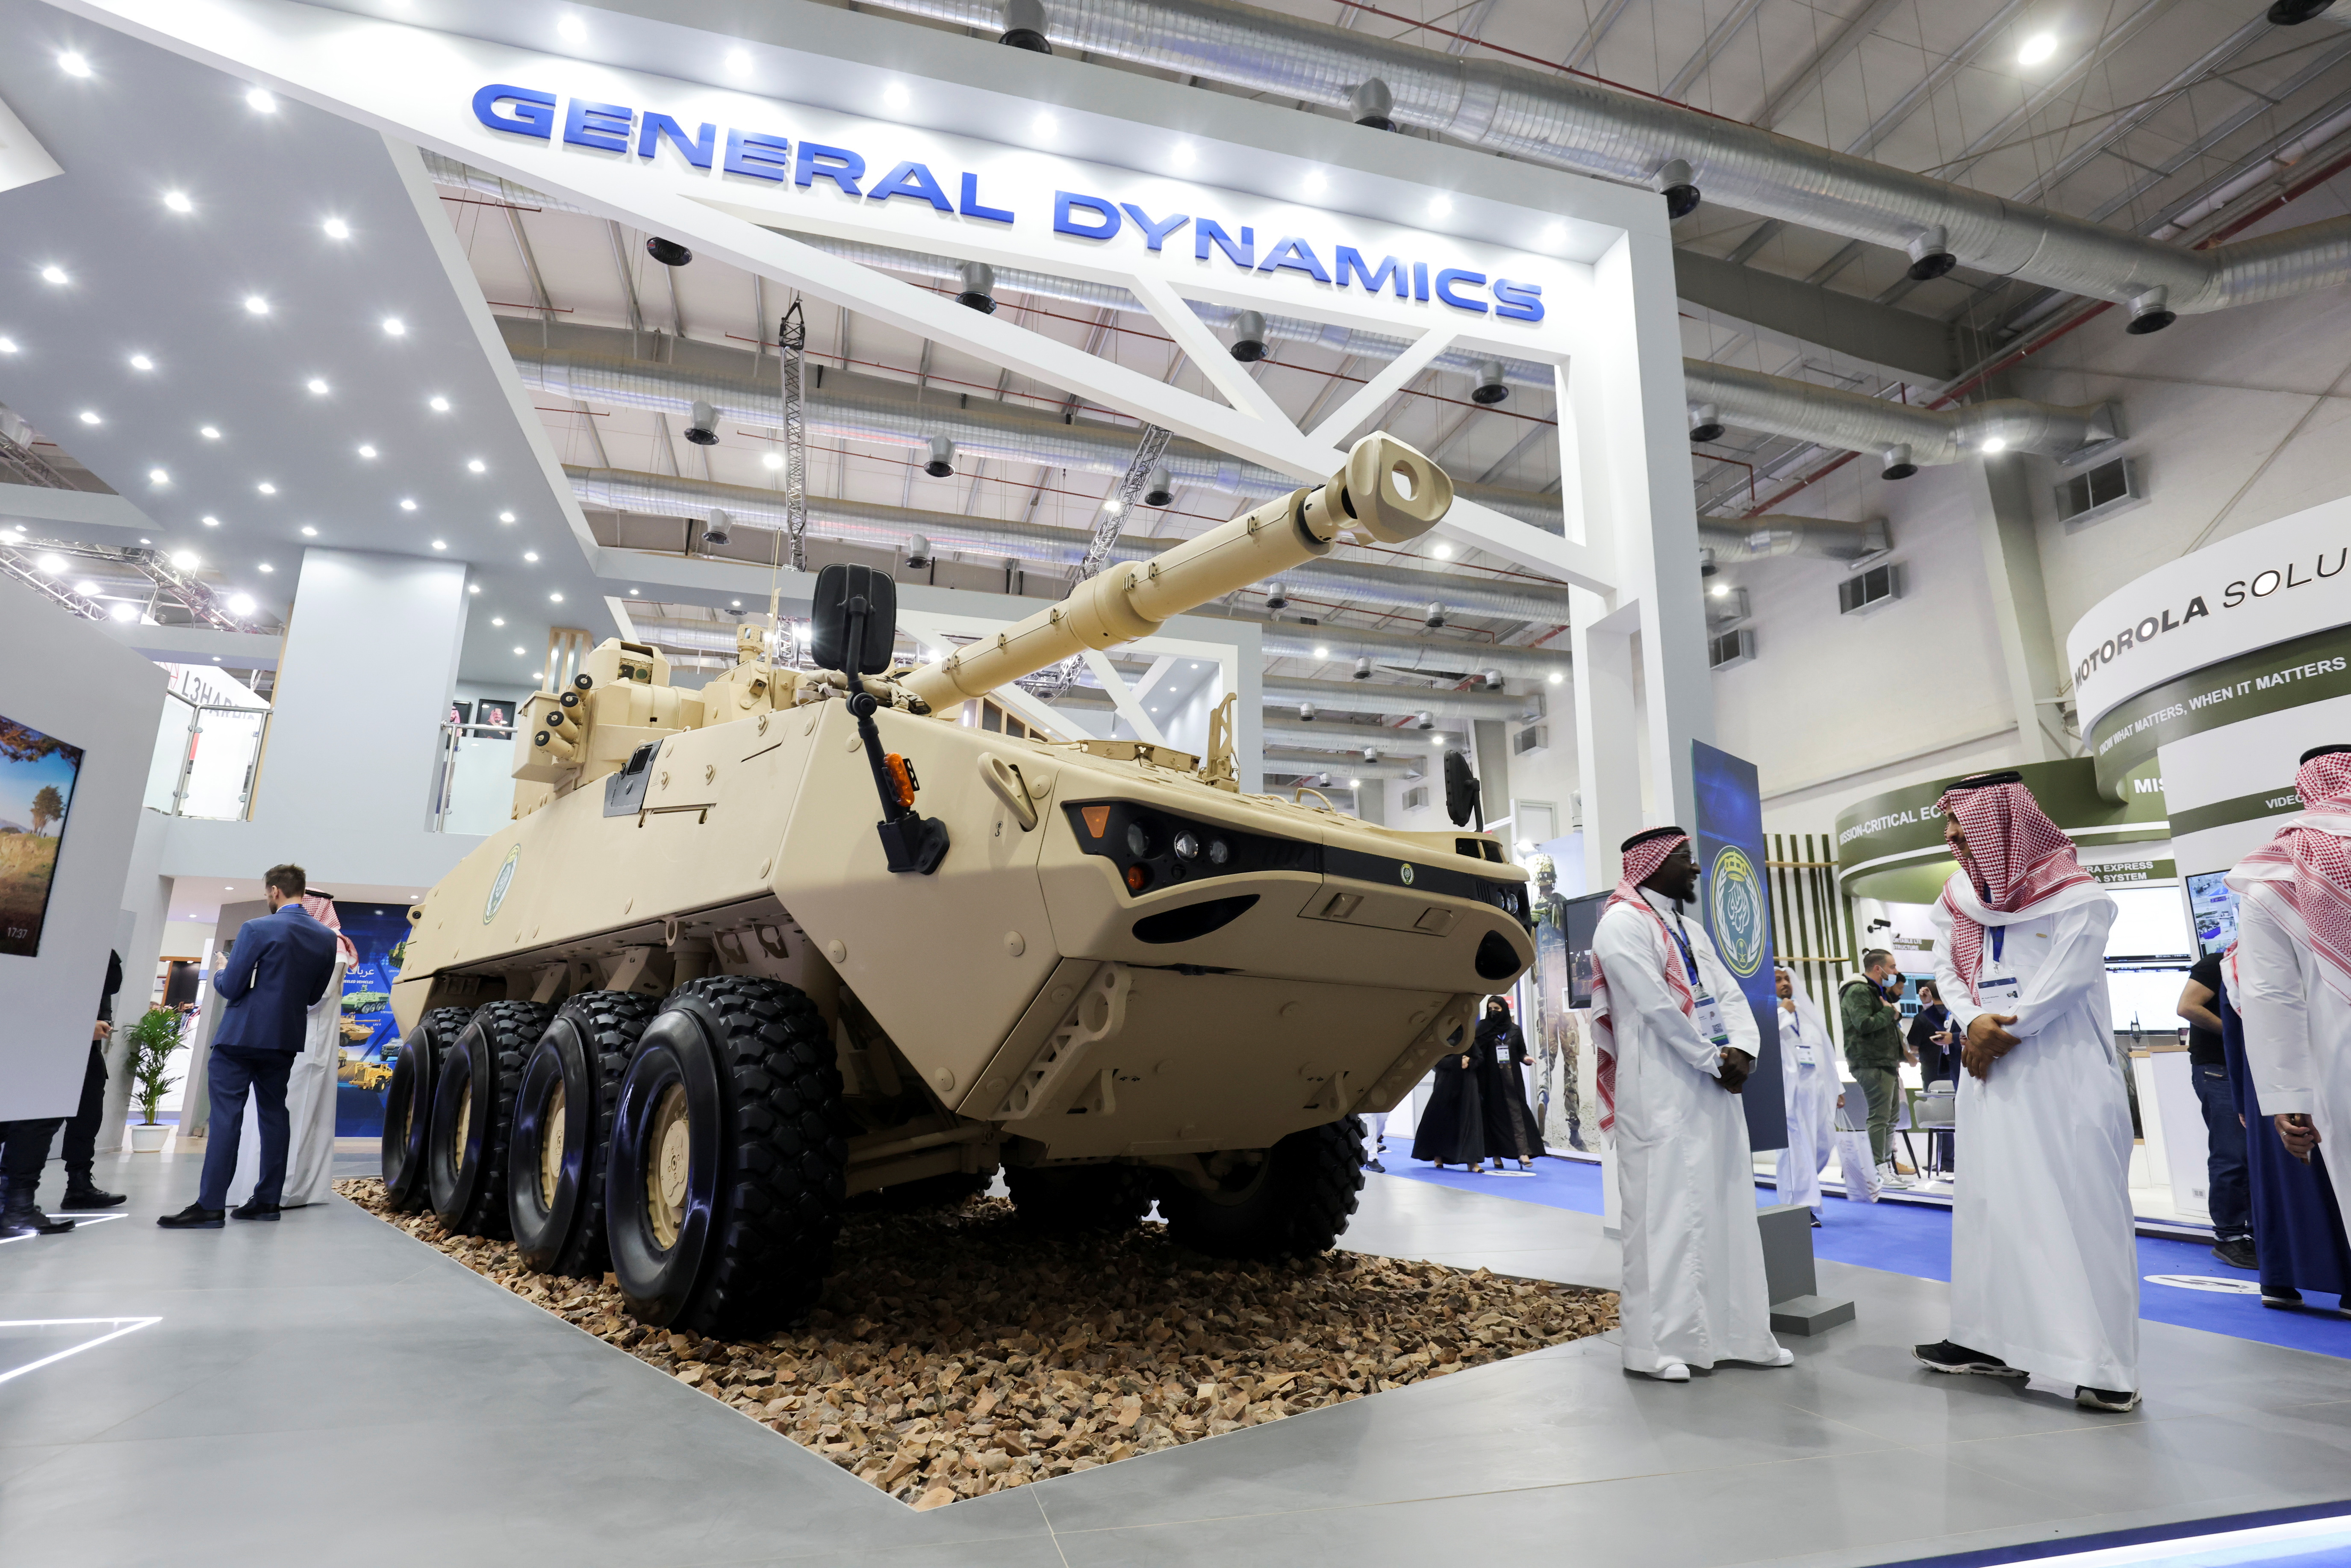 Saudi men are seen at General Dynamics stand displaying the latest defence system at World Defense Show in Riyadh, Saudi Arabia